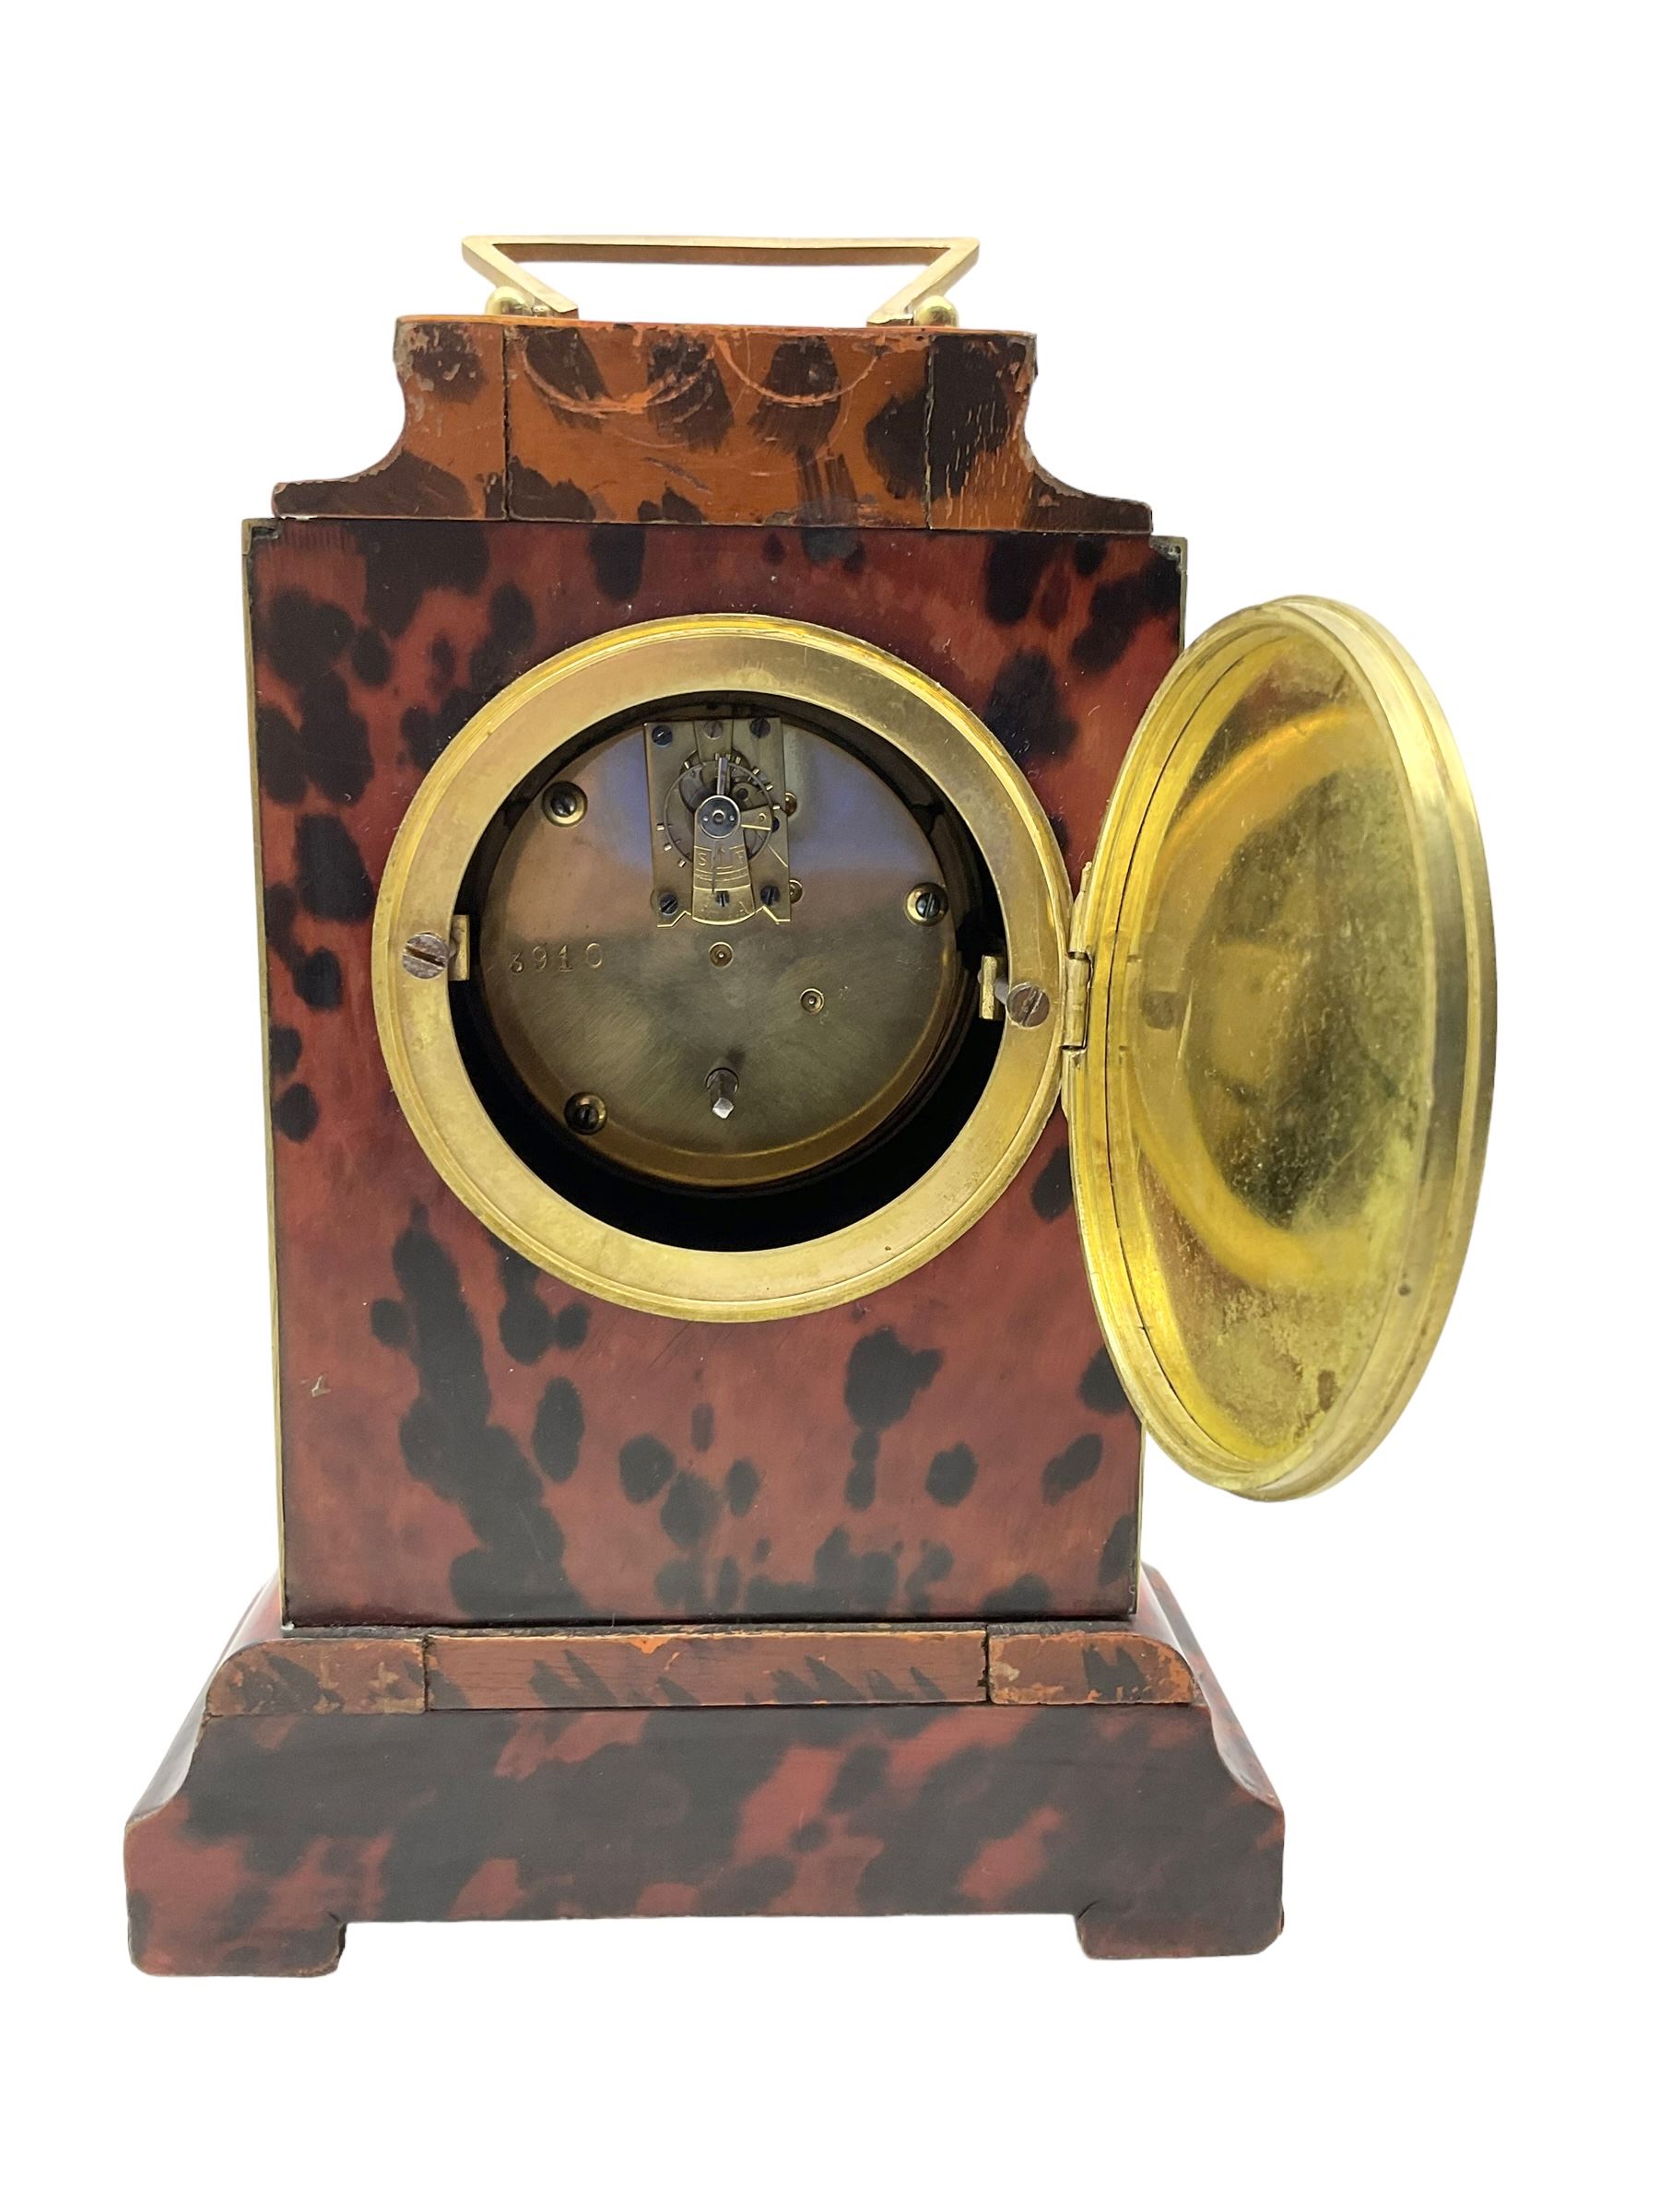 French - Early 20th century faux tortoiseshell mantle clock - Image 4 of 4